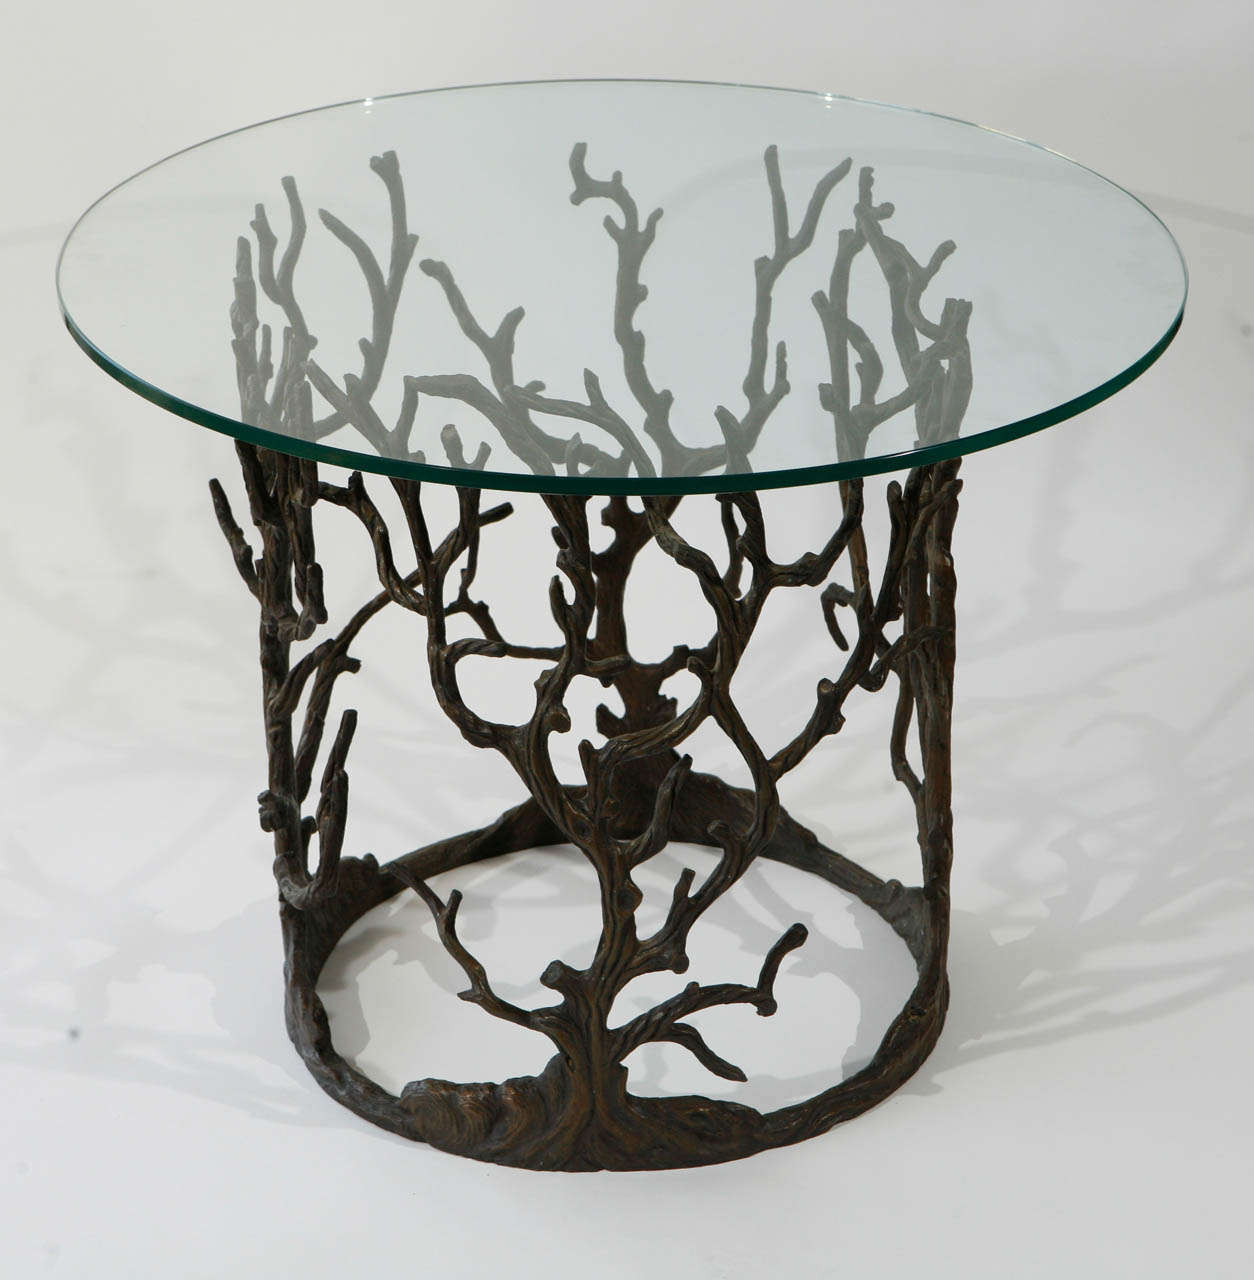 Hand made cast brass sculptural tree branch side table. Excellent execution with differing branches.